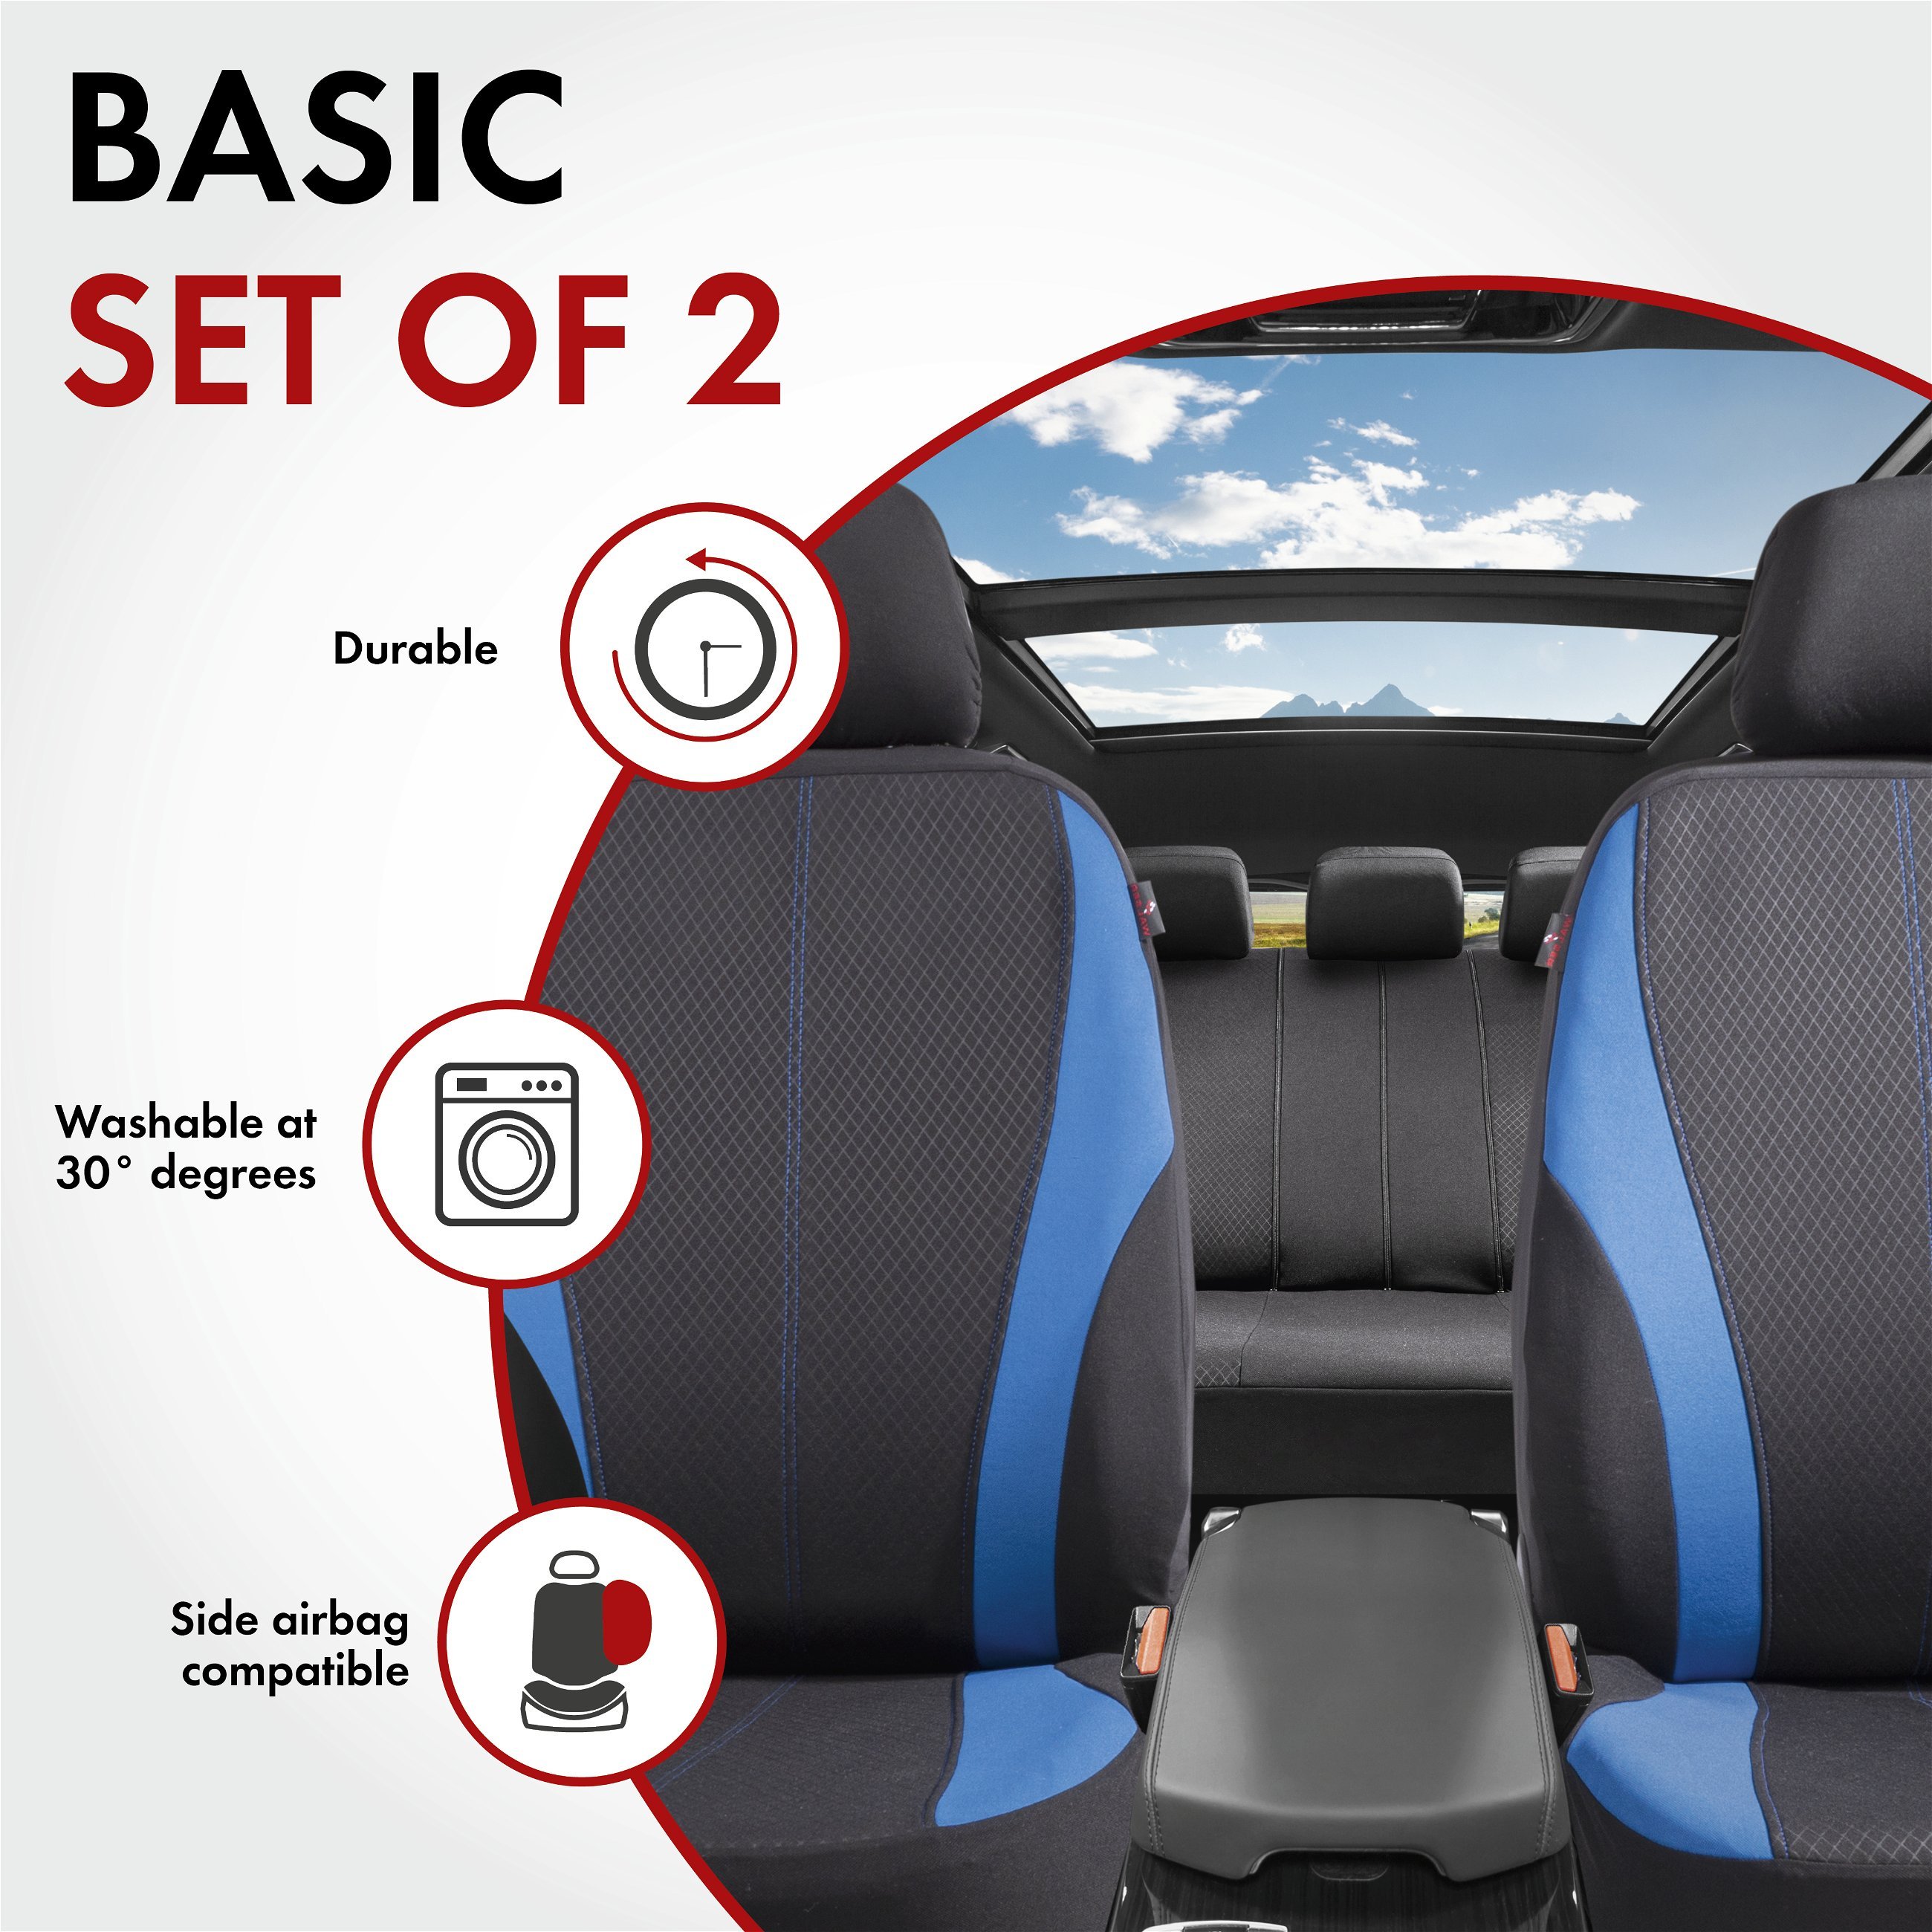 ZIPP IT Car seat covers Dundee for two front seats with zip-system black/blue